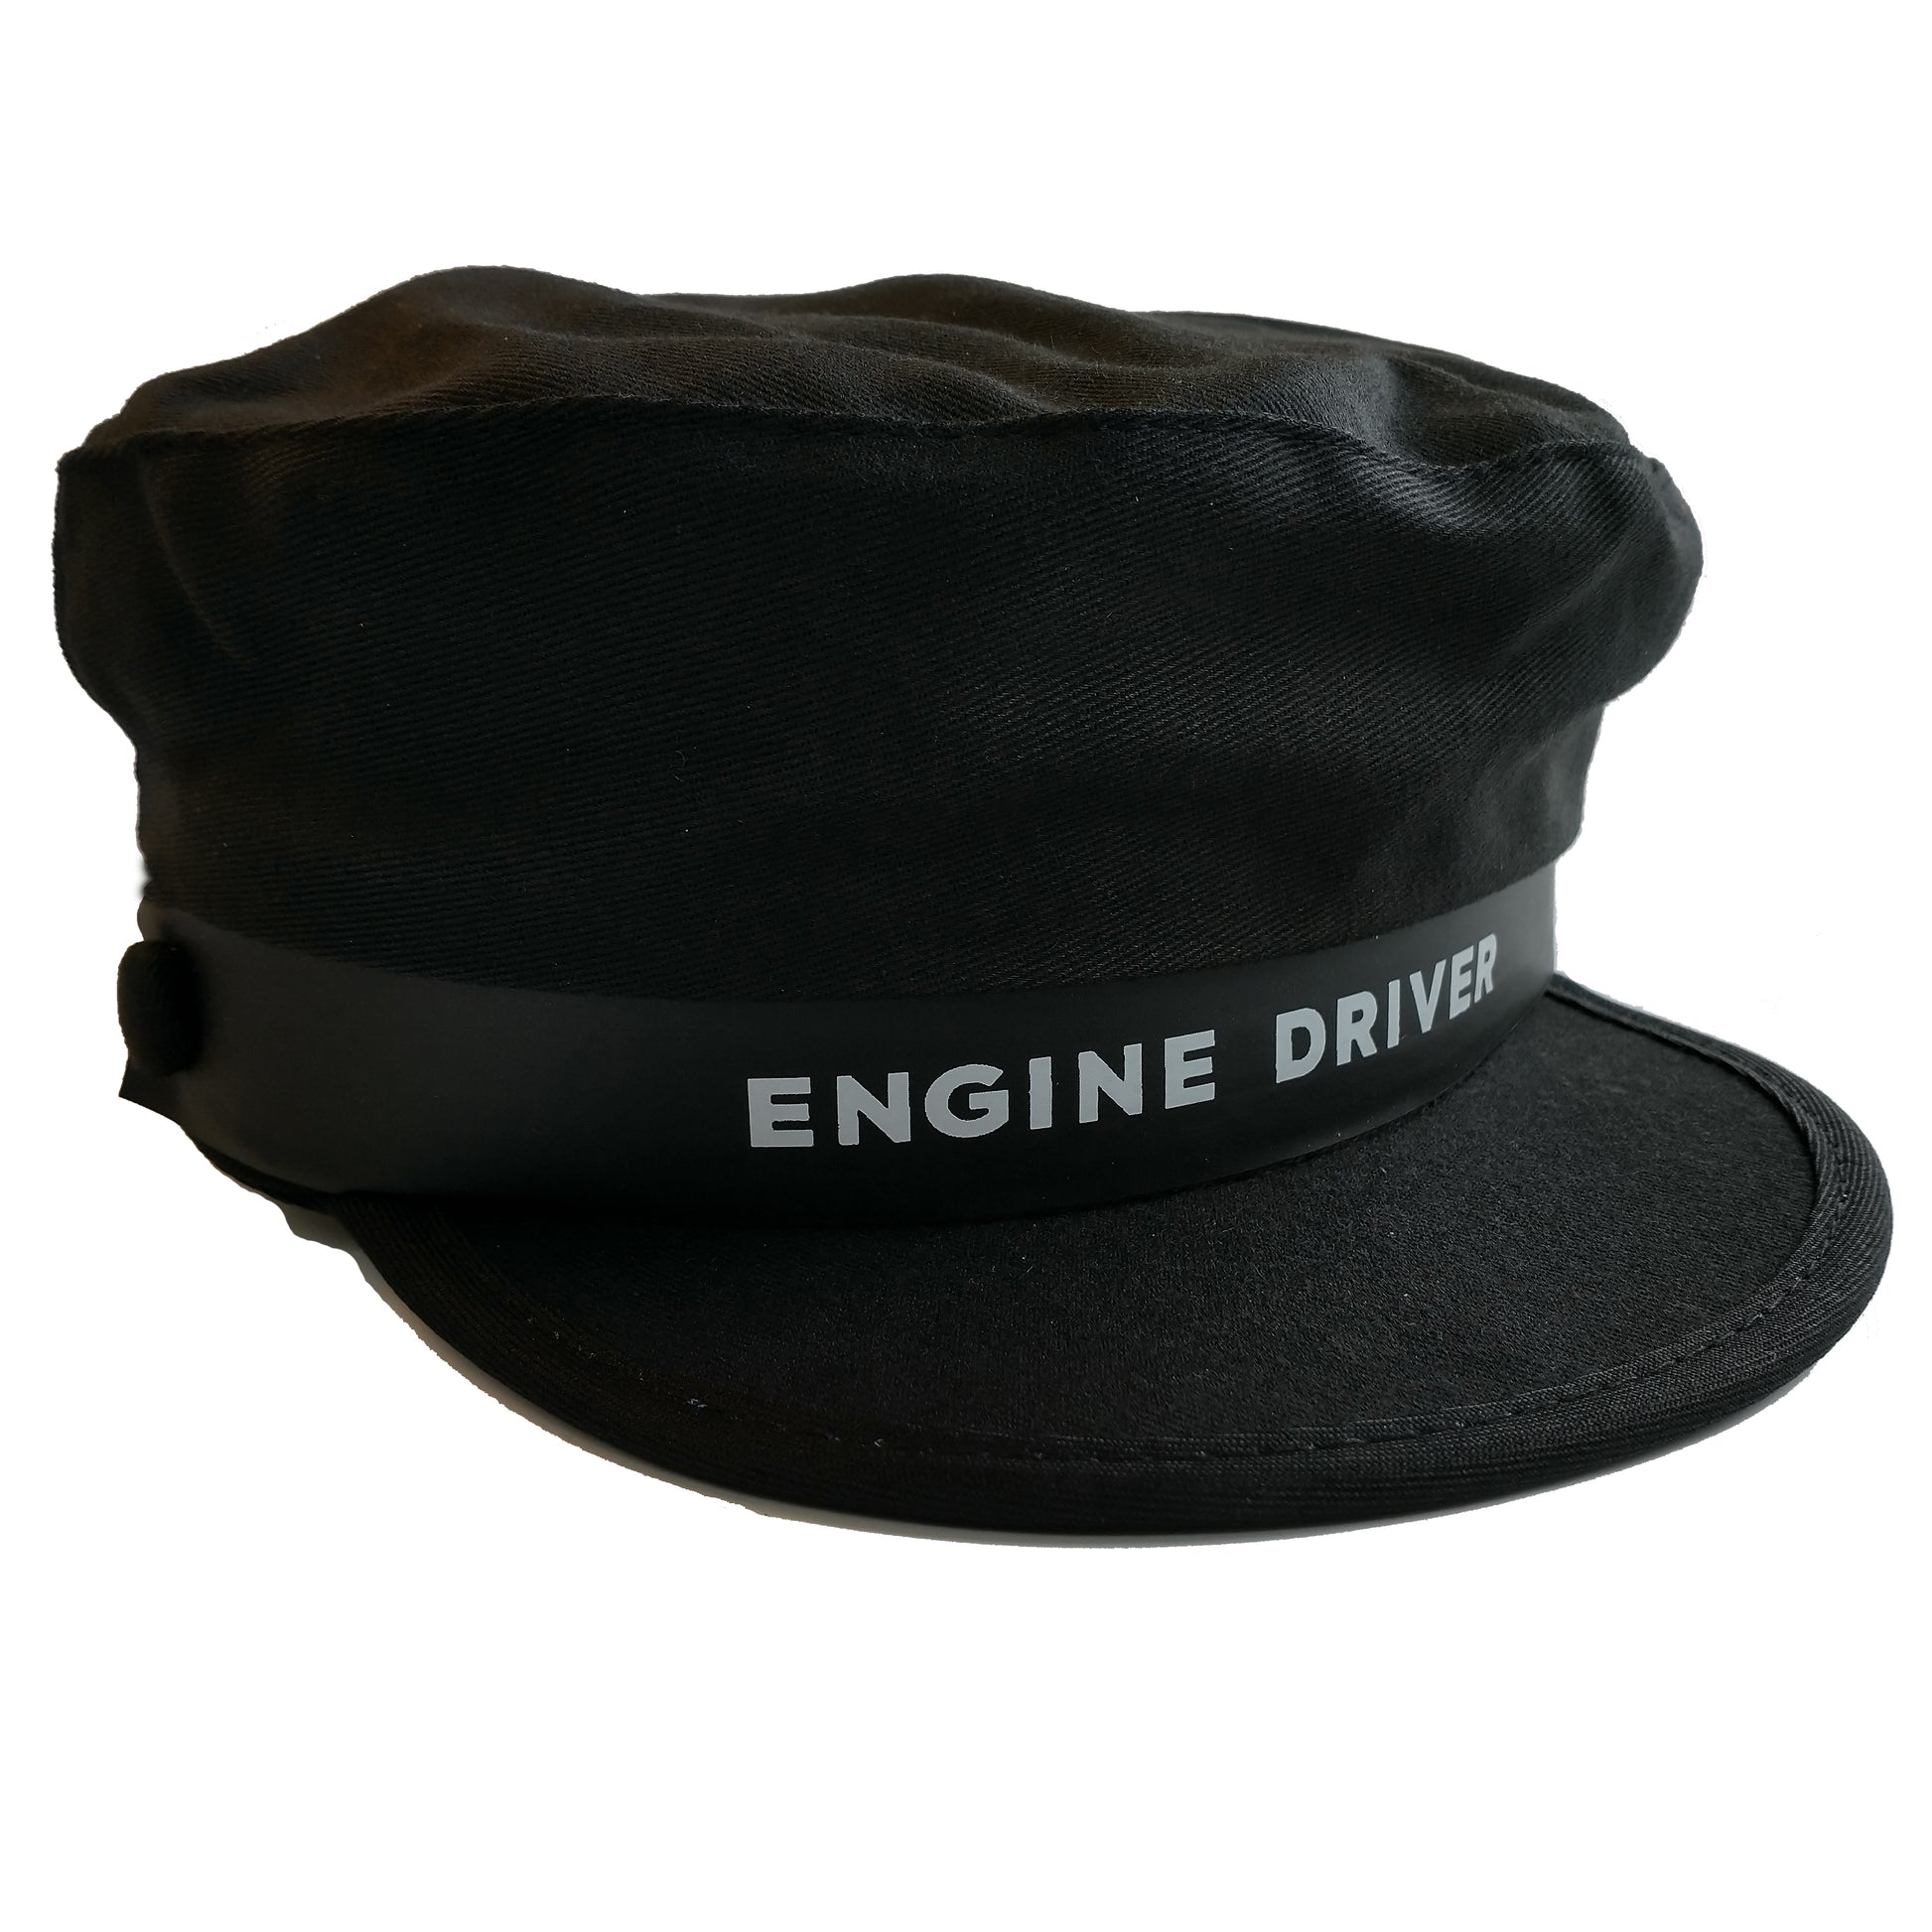 Black cap with Engine Driver printed in white on the front band